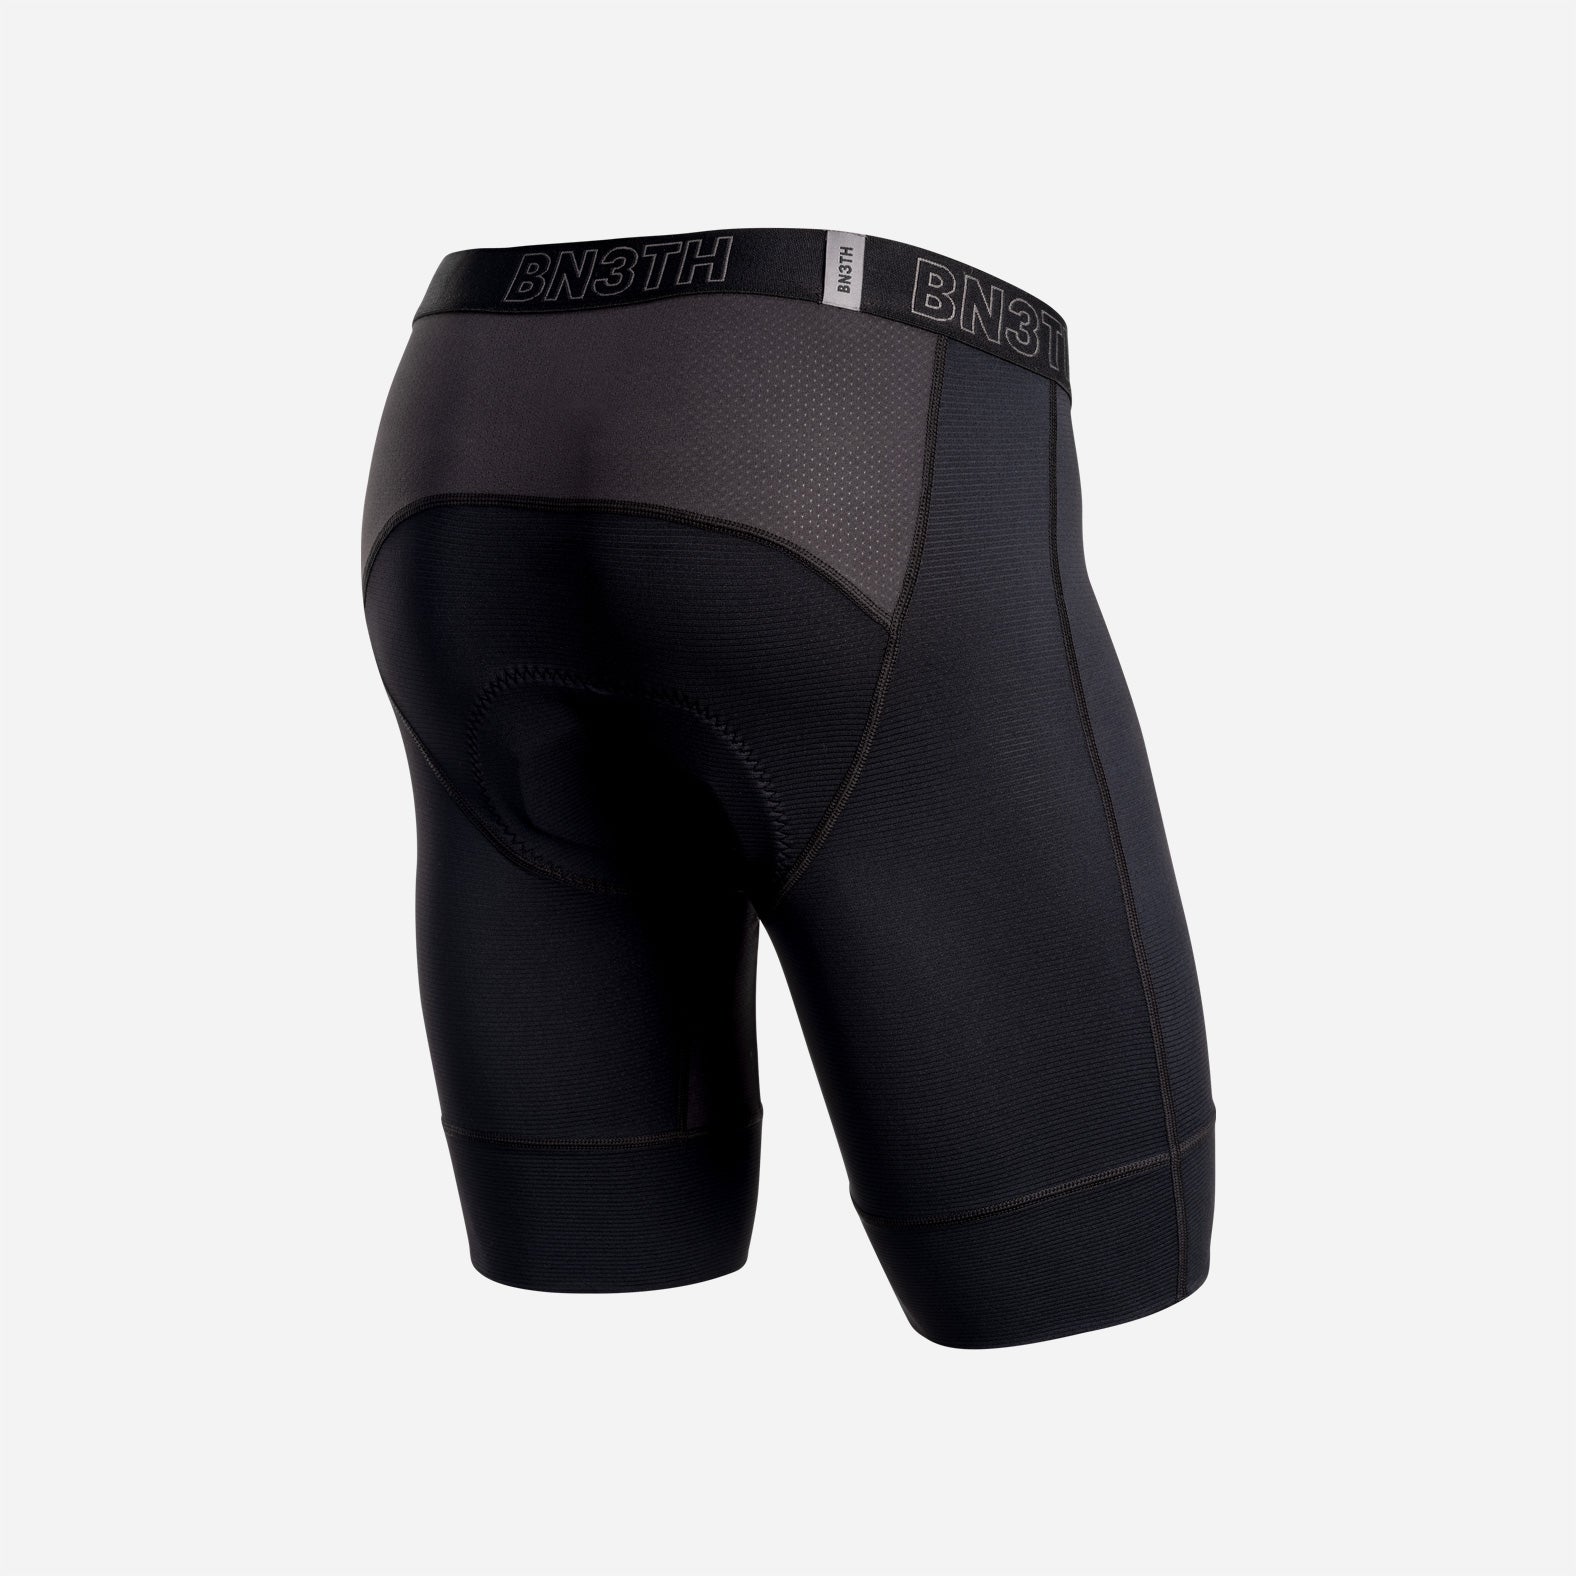 Do you wear underwear with bicycle shorts? -  Tips, Tricks,  Product and Ride Reviews